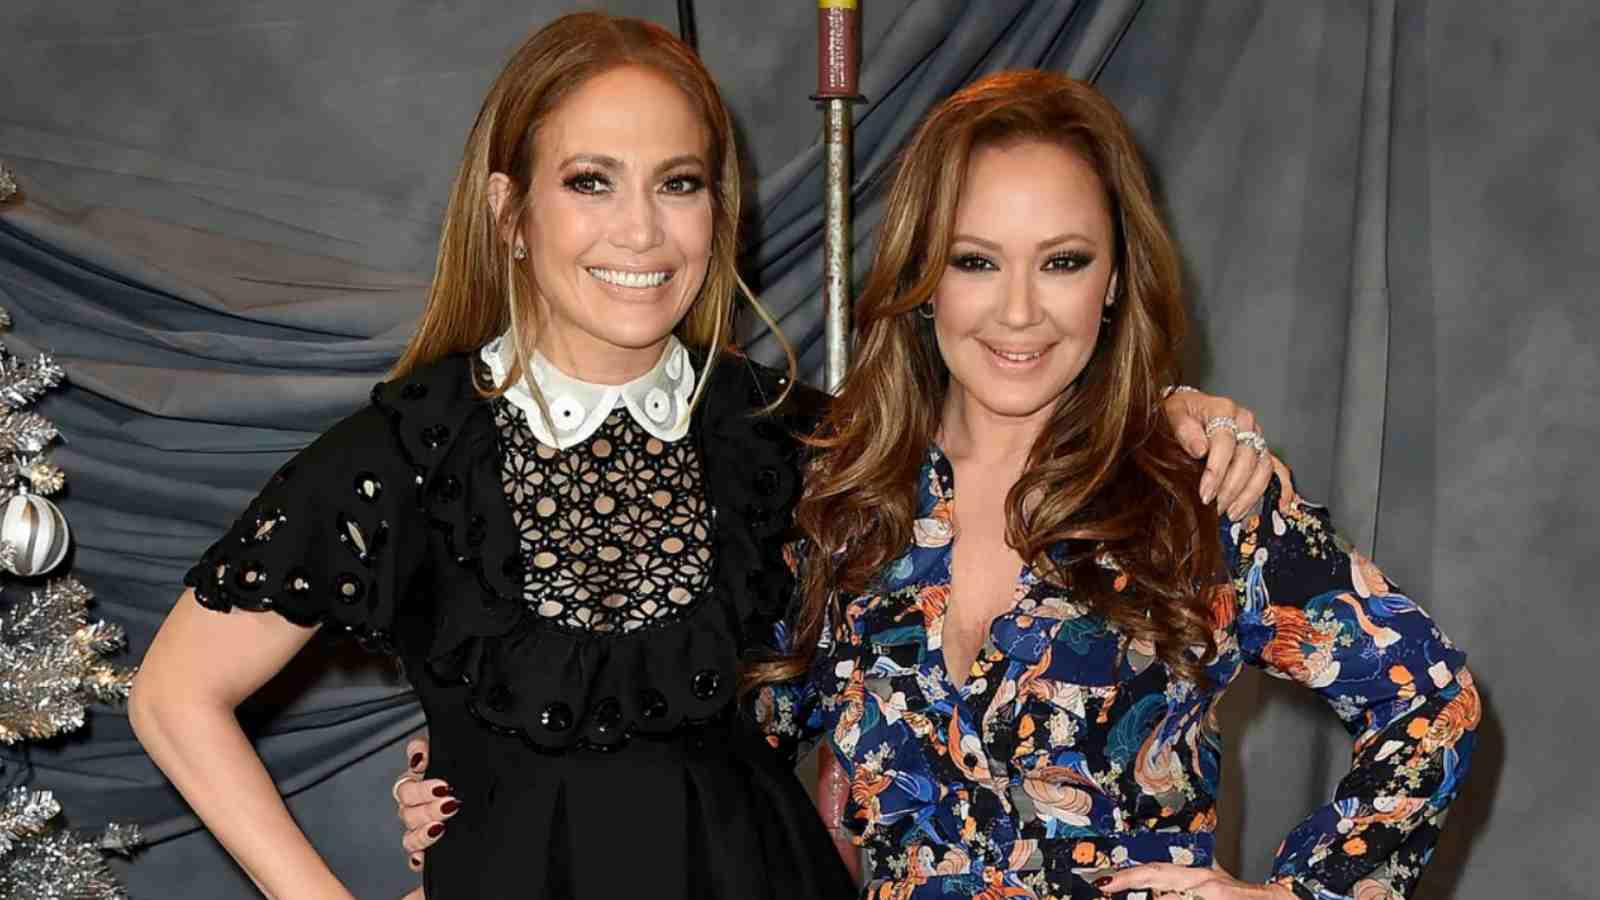 Leah Remini Gets Annoyed Of Bff Jennifer Lopez In Video That Led To